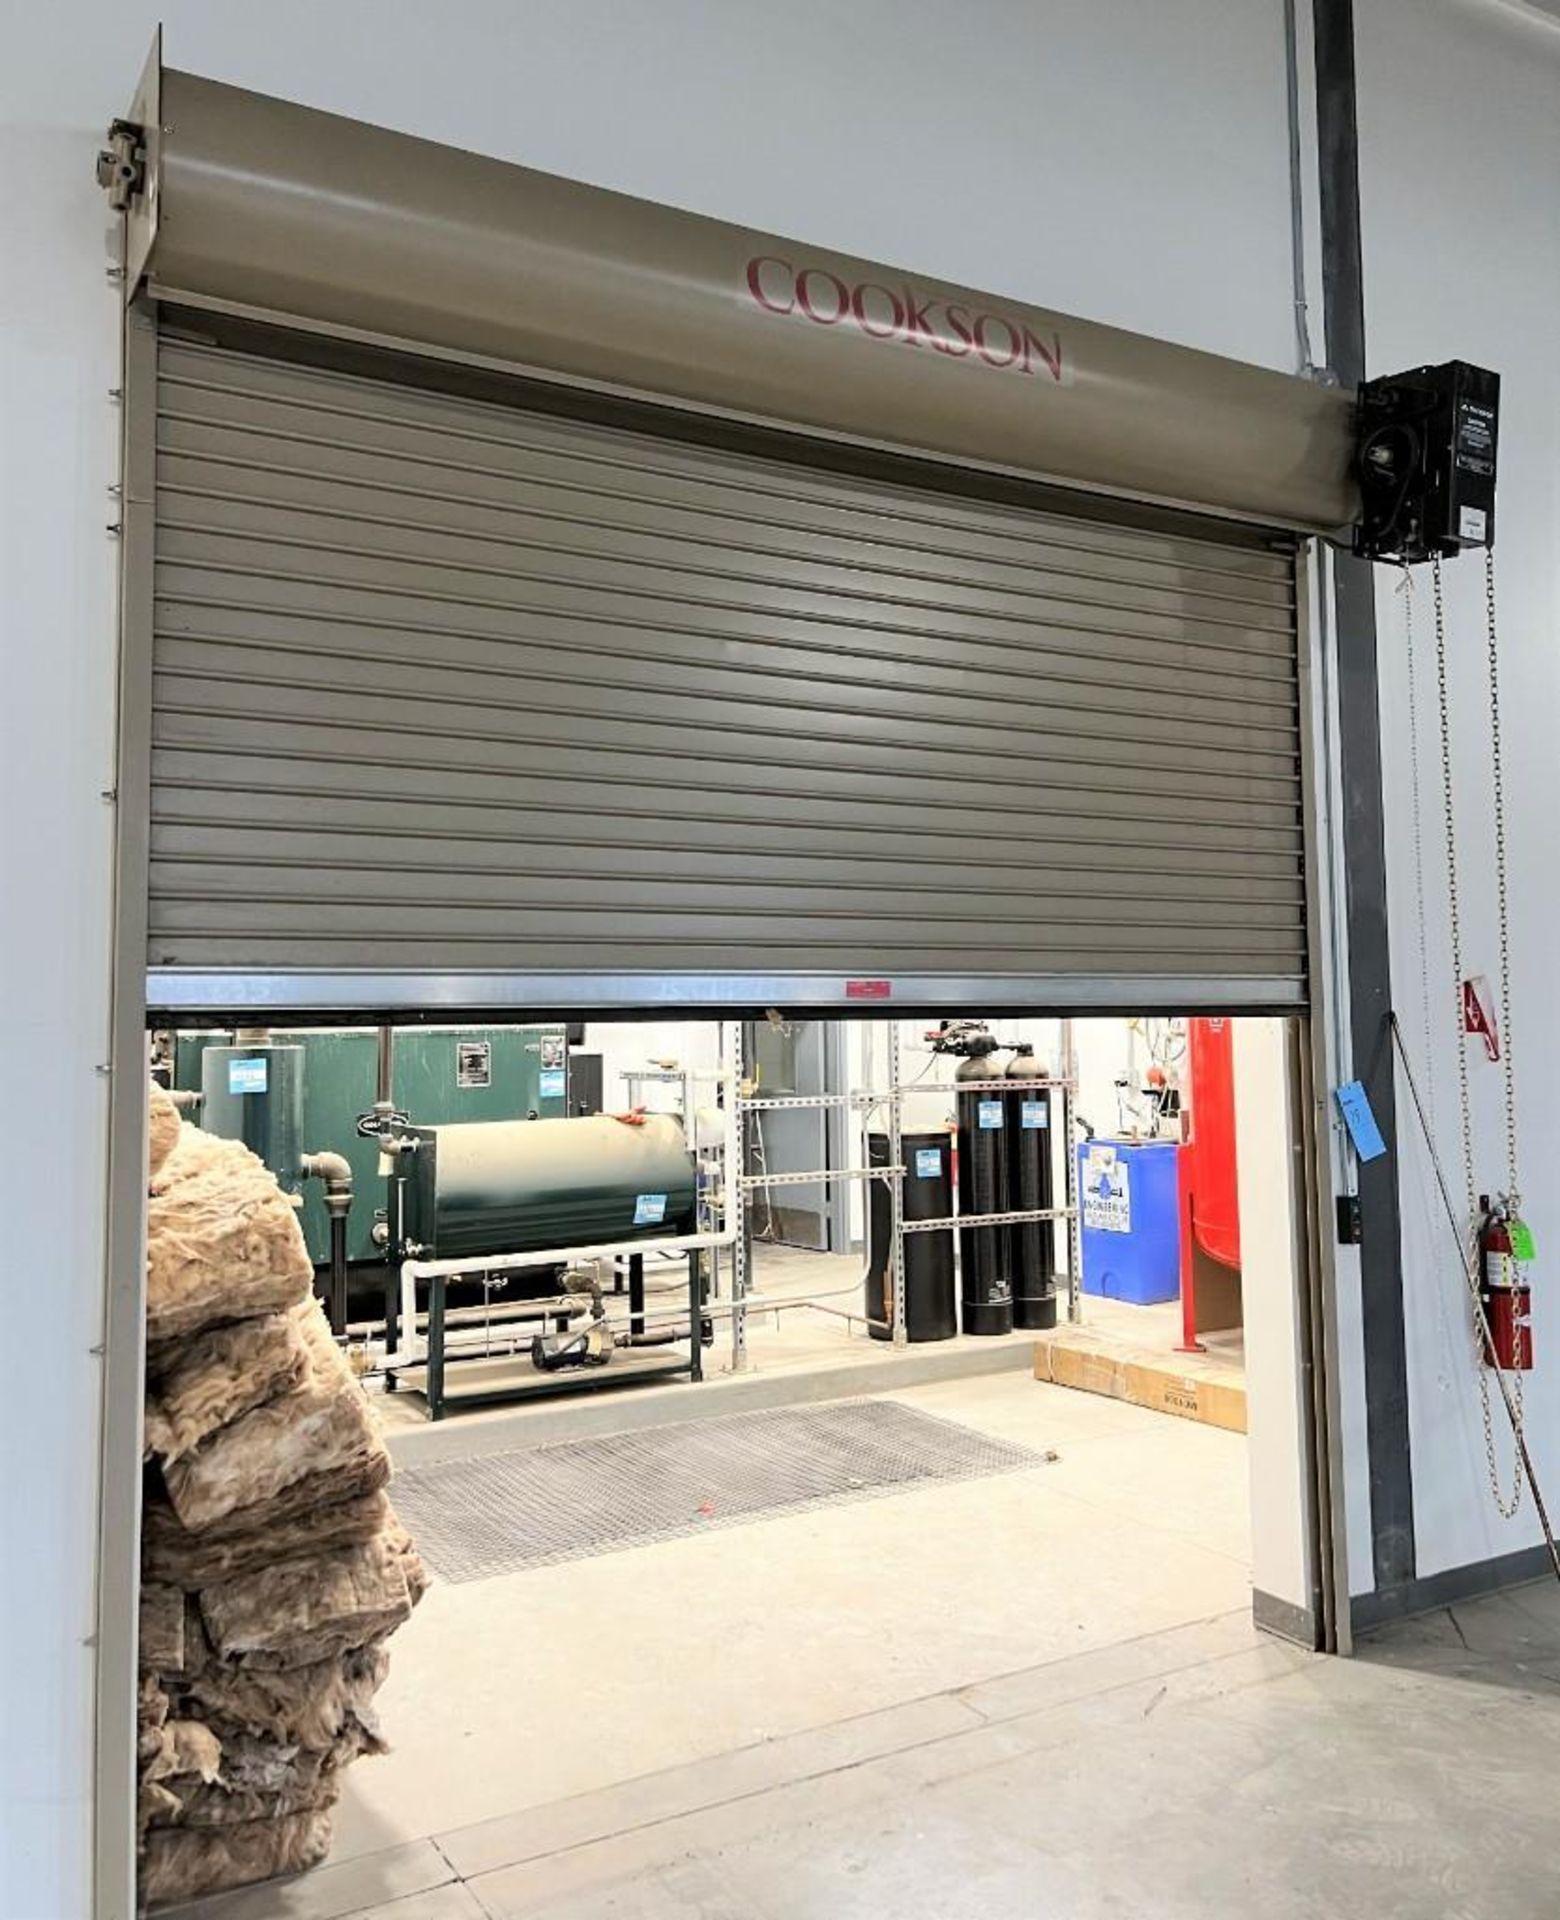 Cookson Rolling Door, Approximate 10' x 10' Opening, Serial# SO7118626-001, Built 12/19/2018. With M - Image 2 of 7